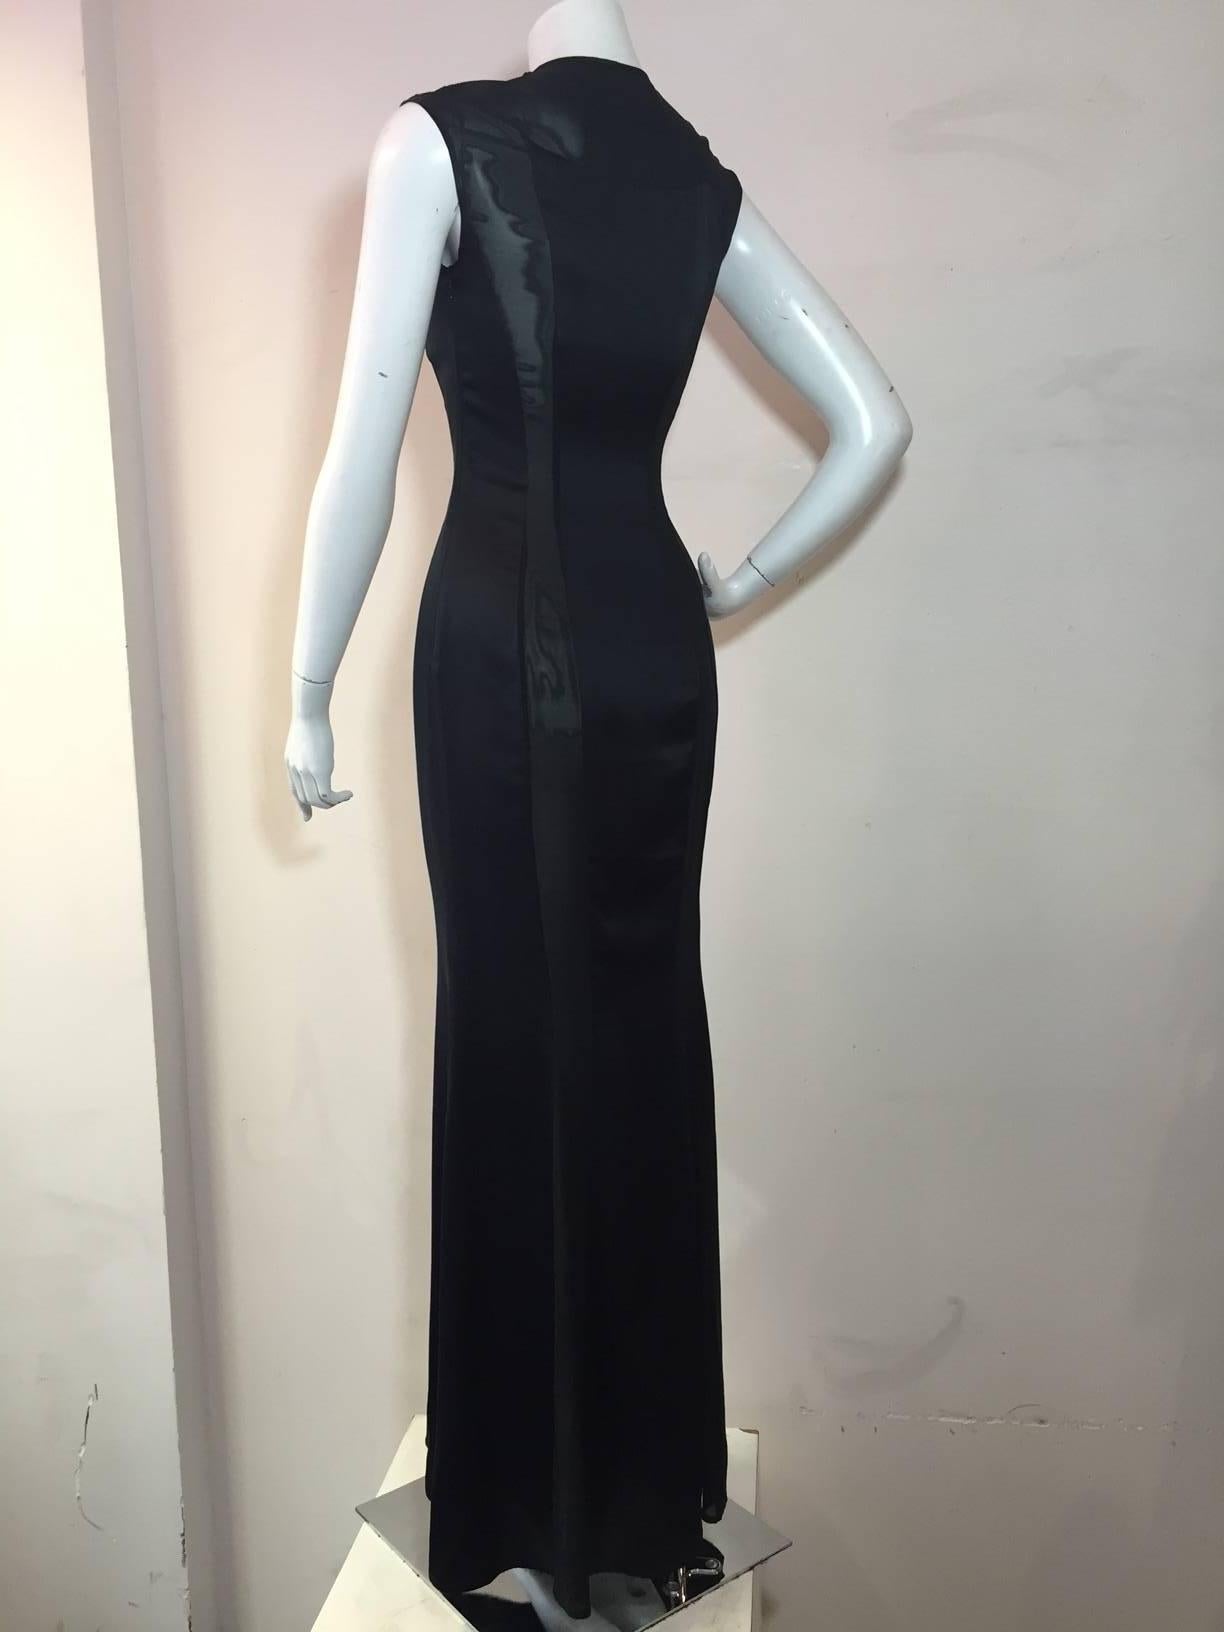 A 1990s  Richard Tyler silk satin gown in black with daring sheer silk and lycra chiffon panels running the length of the gown giving it a body conscious fit.  Flared fishtail hem.  Snap closures at shoulder.